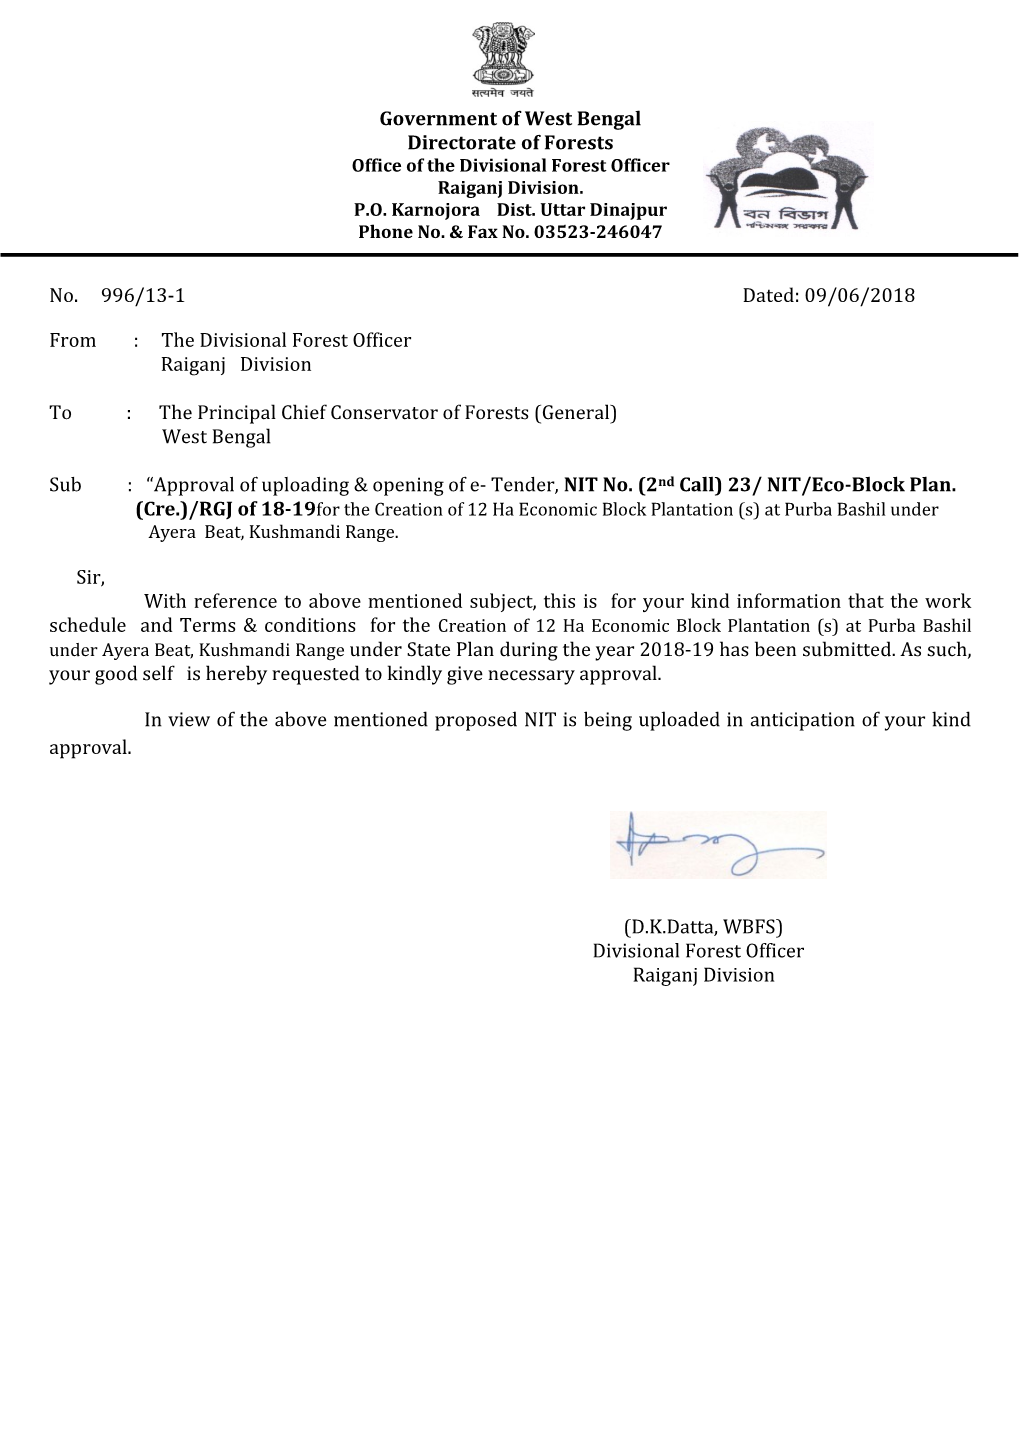 Government of West Bengal Directorate of Forests No. 996/13-1 Dated